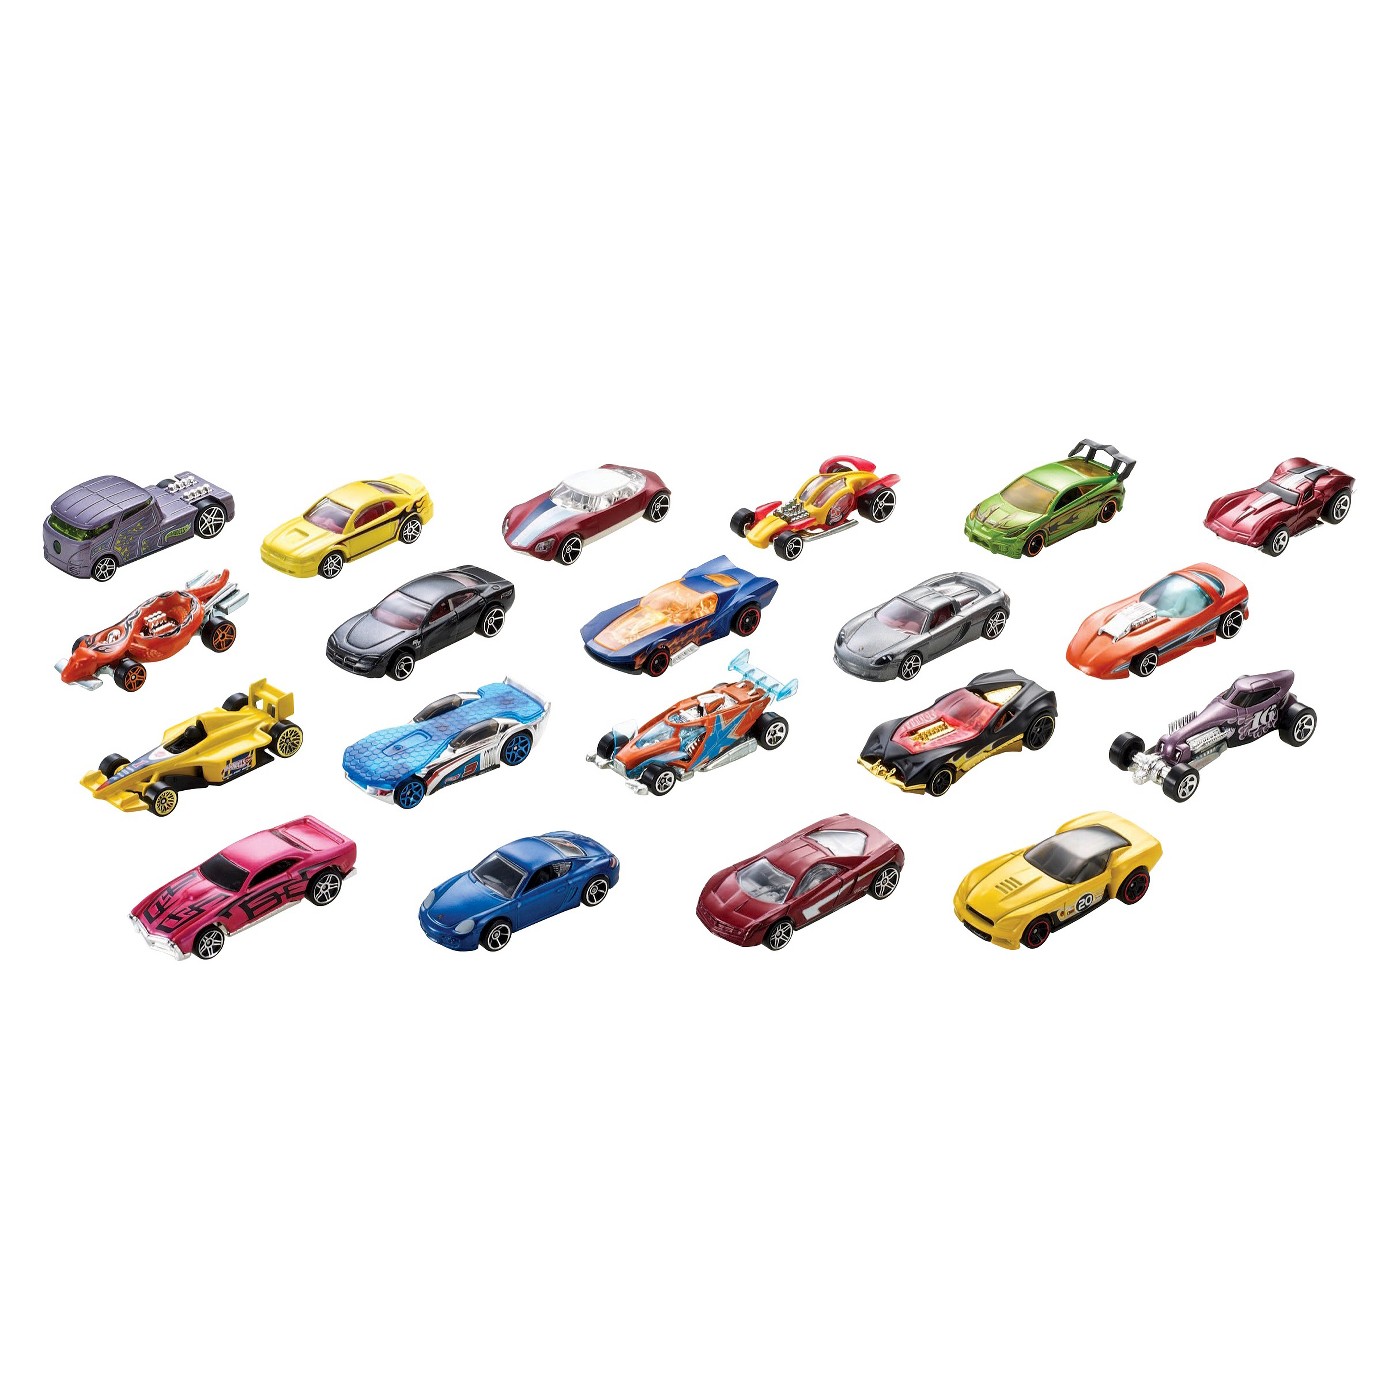 Today only: Kids get a free Hot Wheels car at Target